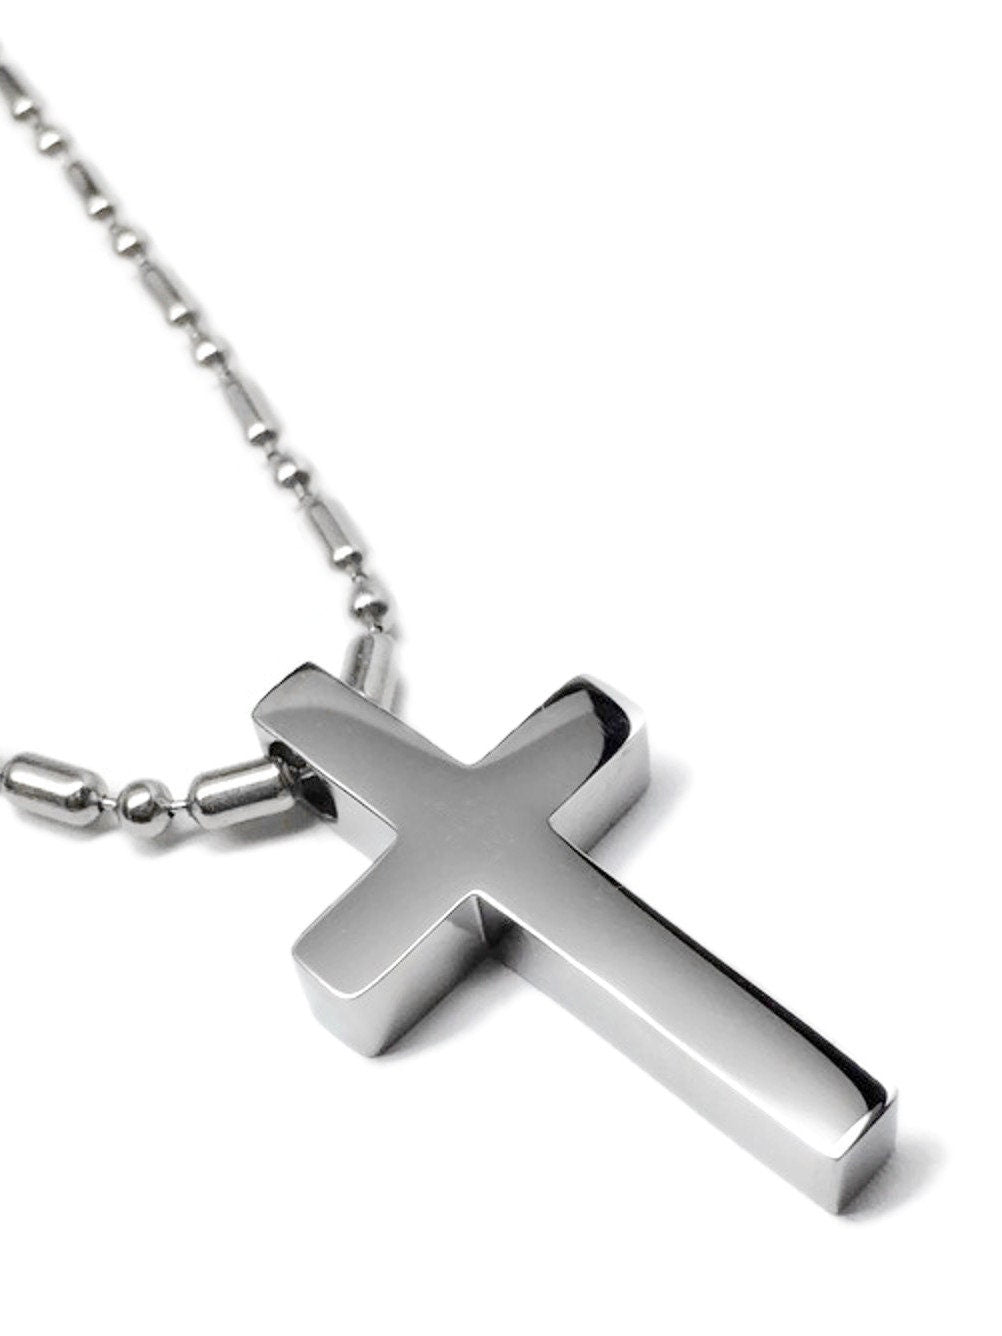 Stainless Steel Cross Necklace, Religious Jewelry, Catholic Gifts for Men, Military Bead Chain, Silver Man Jewellery, Love, Faith